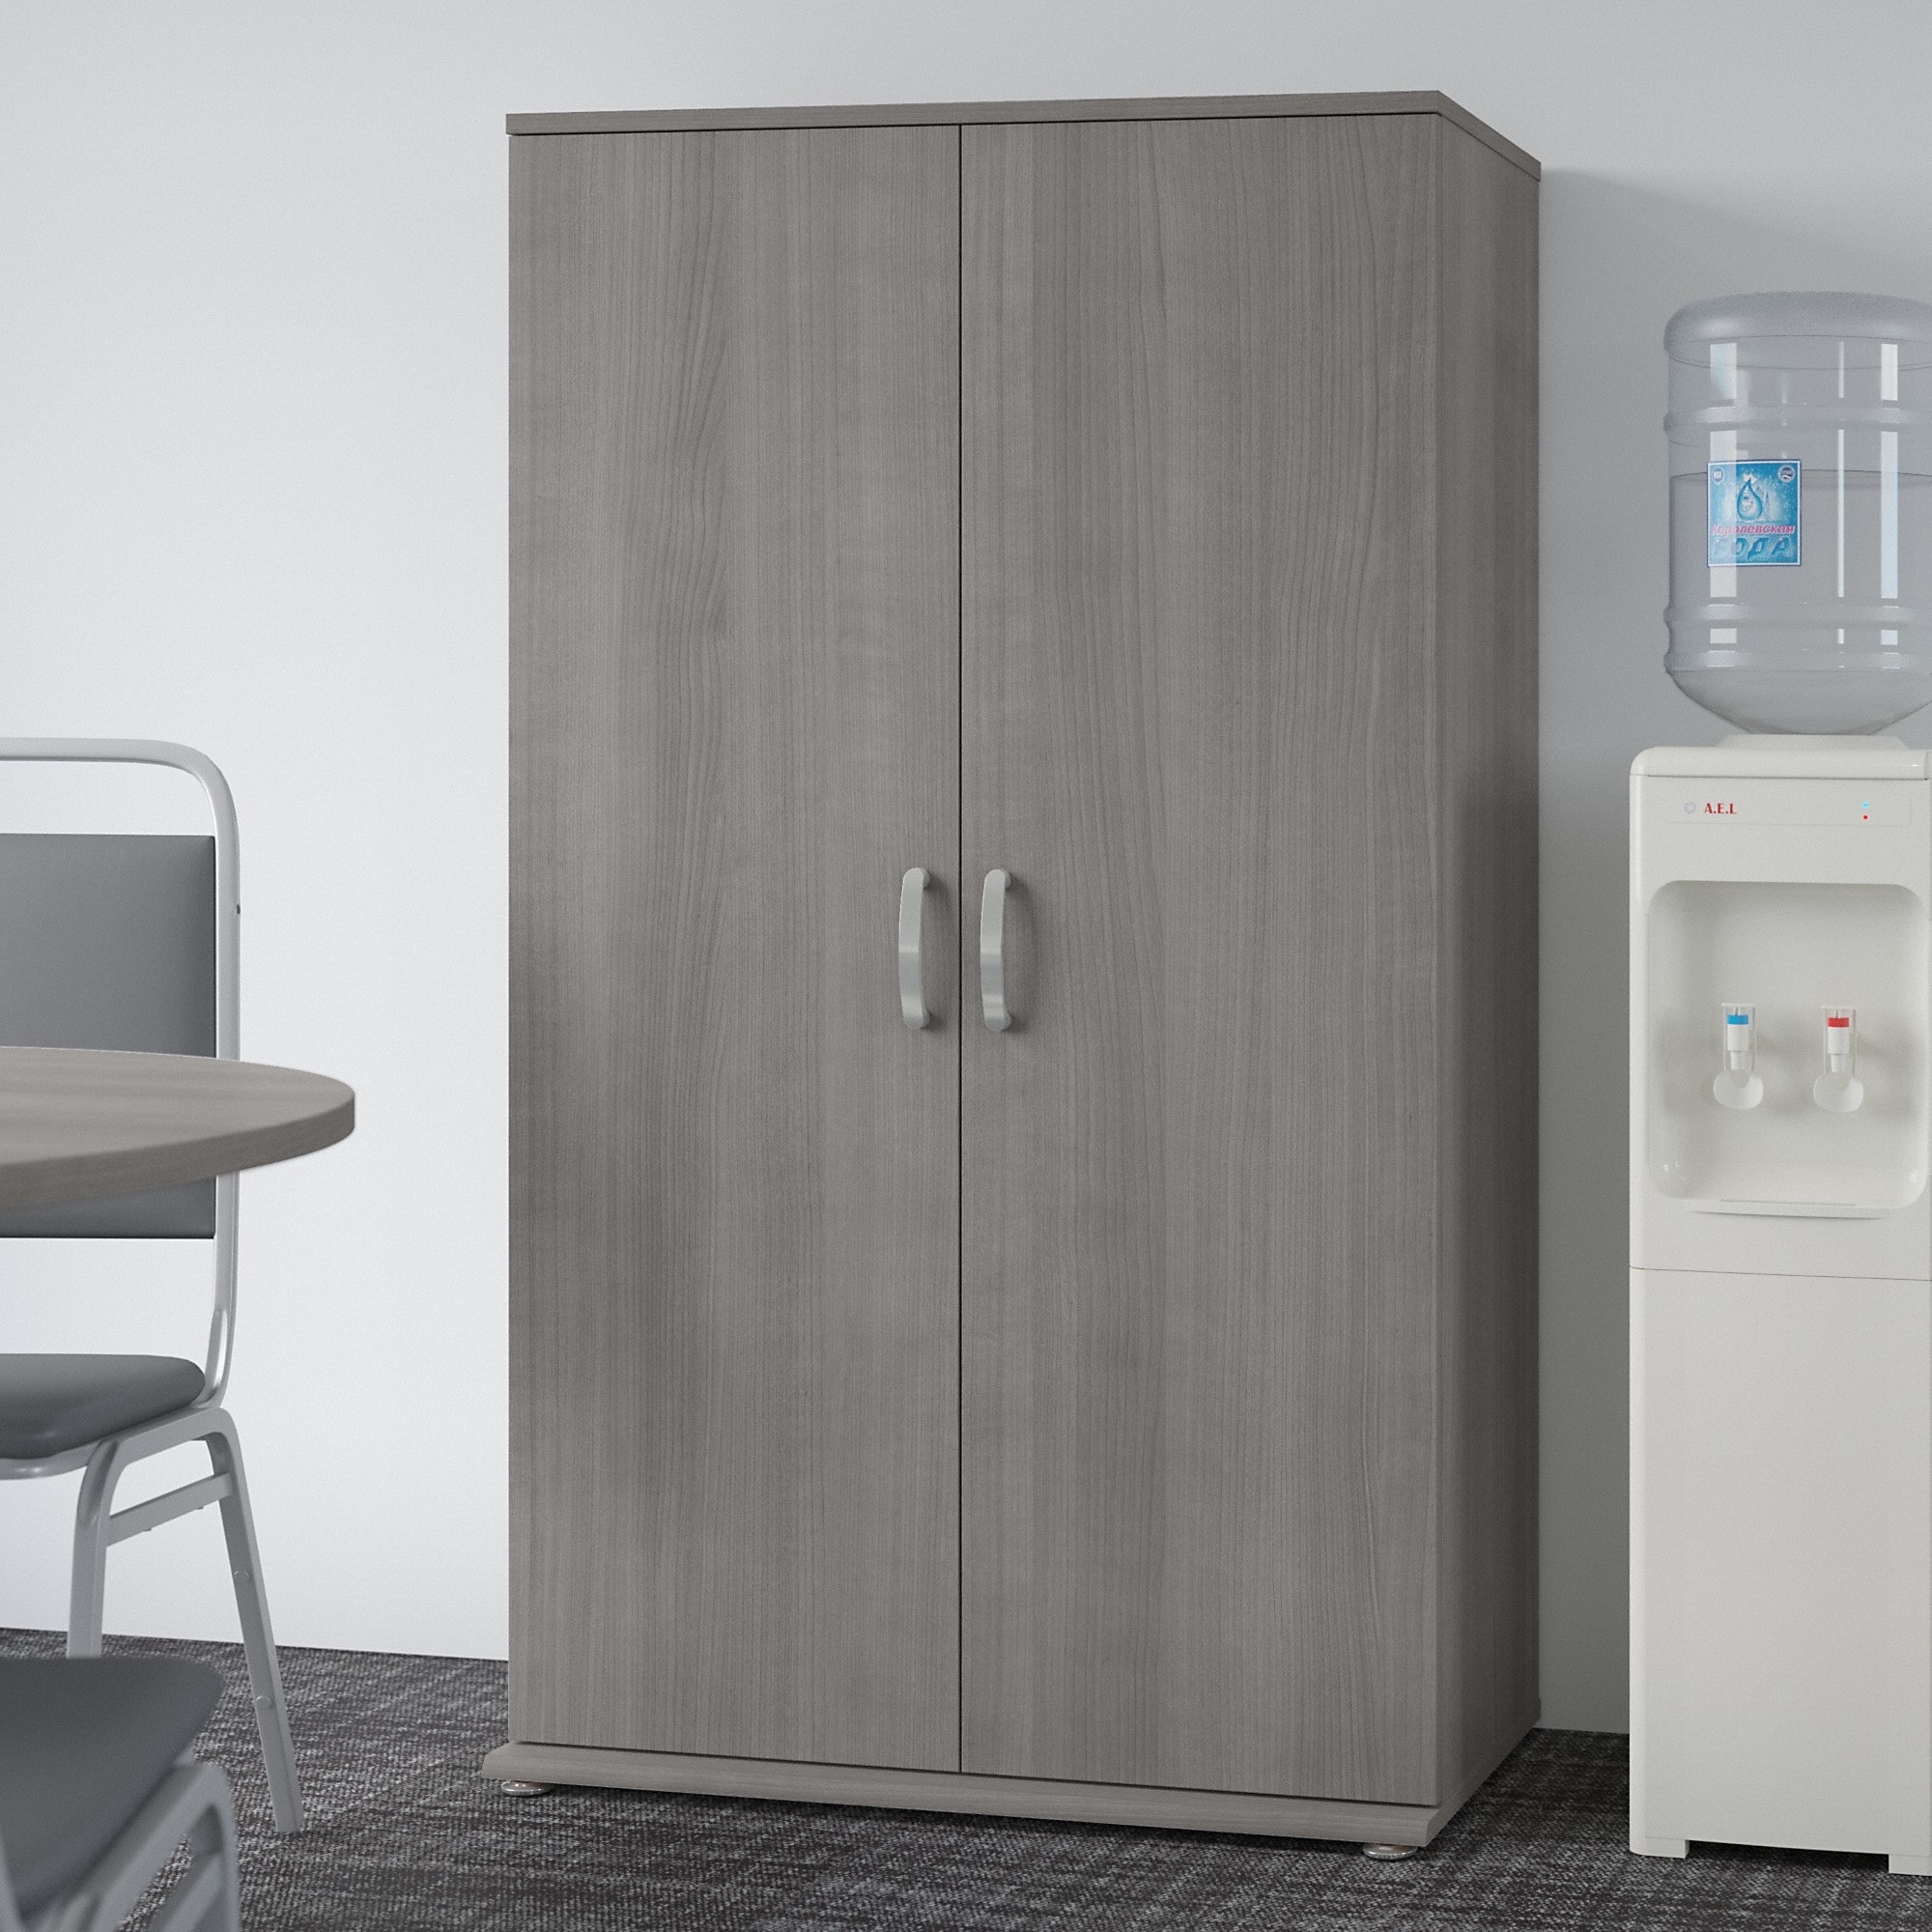 Universal Tall Storage Cabinet with Doors by Bush Business Furniture - On  Sale - Bed Bath & Beyond - 33758757